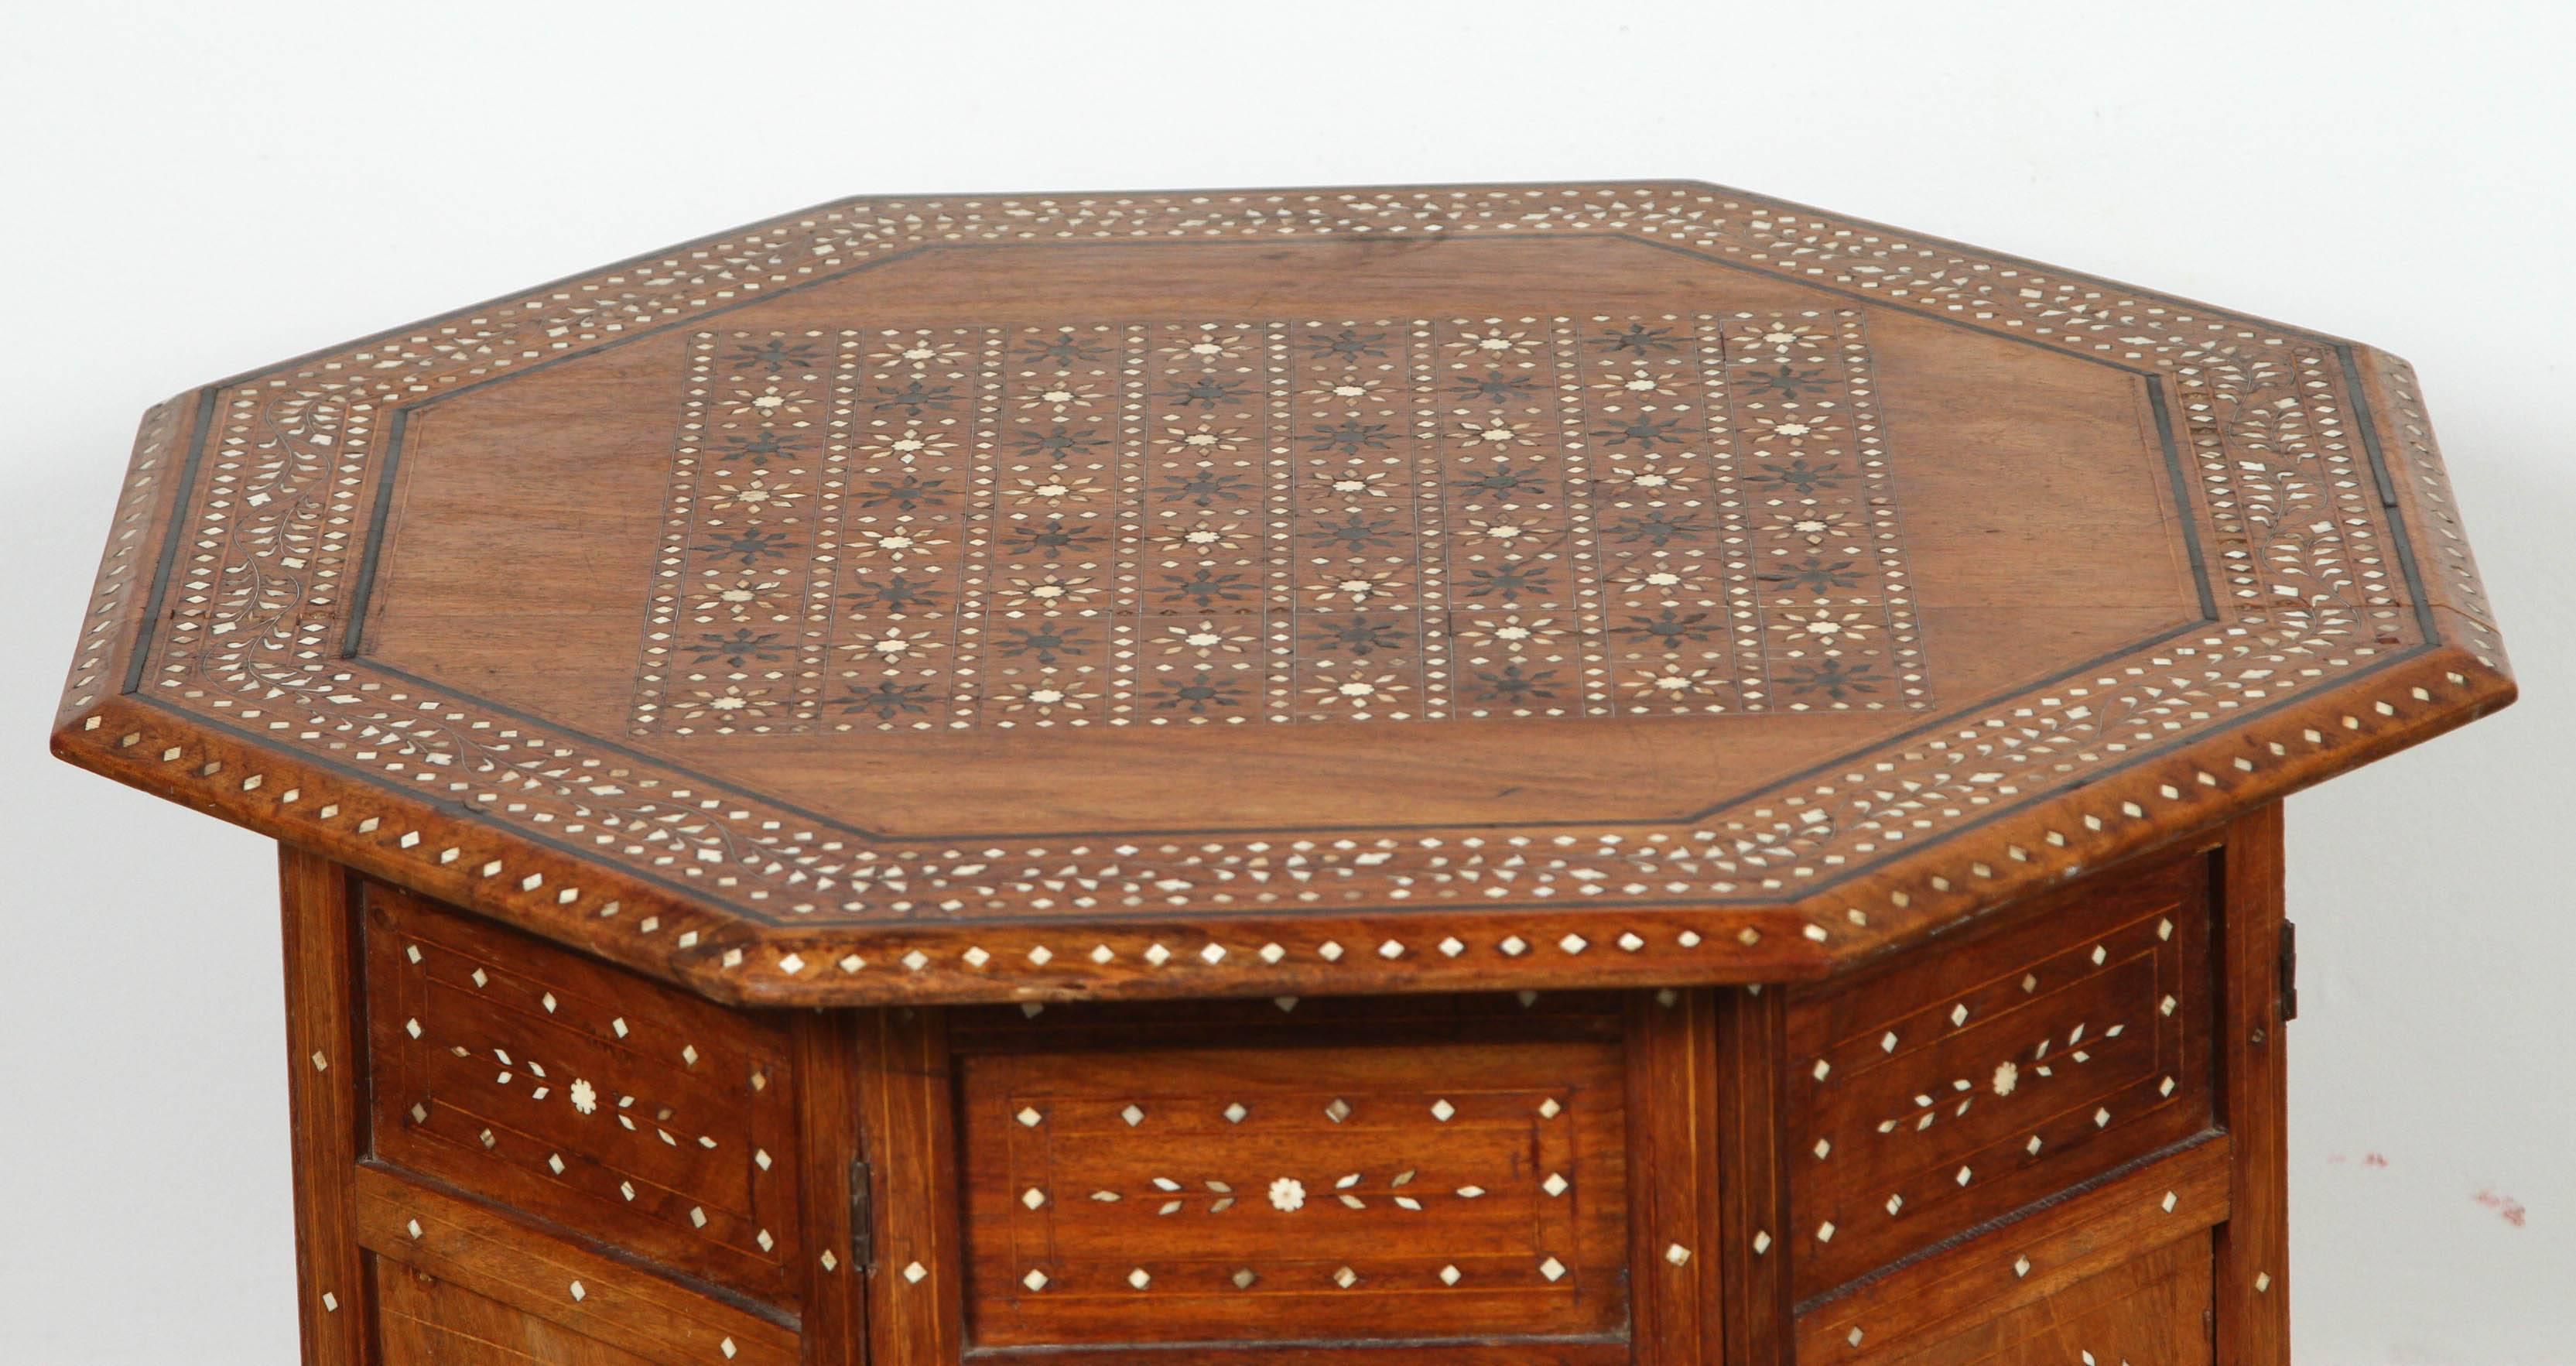 Fine and elegant 19th century Anglo-Indian octagonal rosewood game chest table.
The octagonal top with elaborate bone and ebony inlay feature a chess board design, resting on an eight-sided folding base with small foliate inlay and cut-out arched